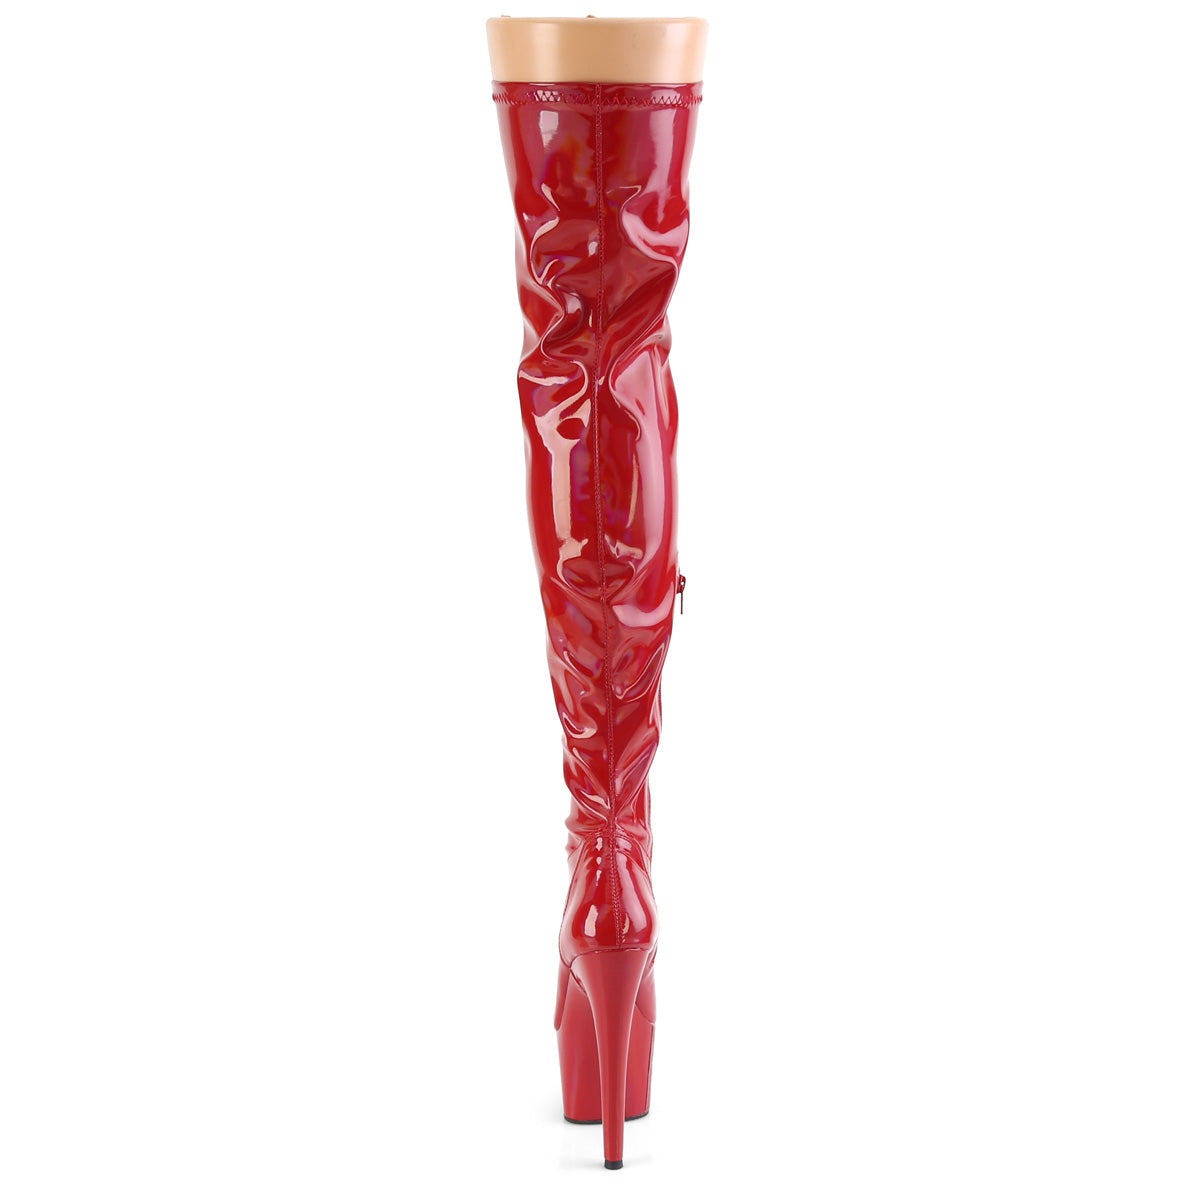 ADORE-3000HWR Pleaser 7" Heel Red Pole Dancing Thigh Highs-Pleaser- Sexy Shoes Fetish Footwear